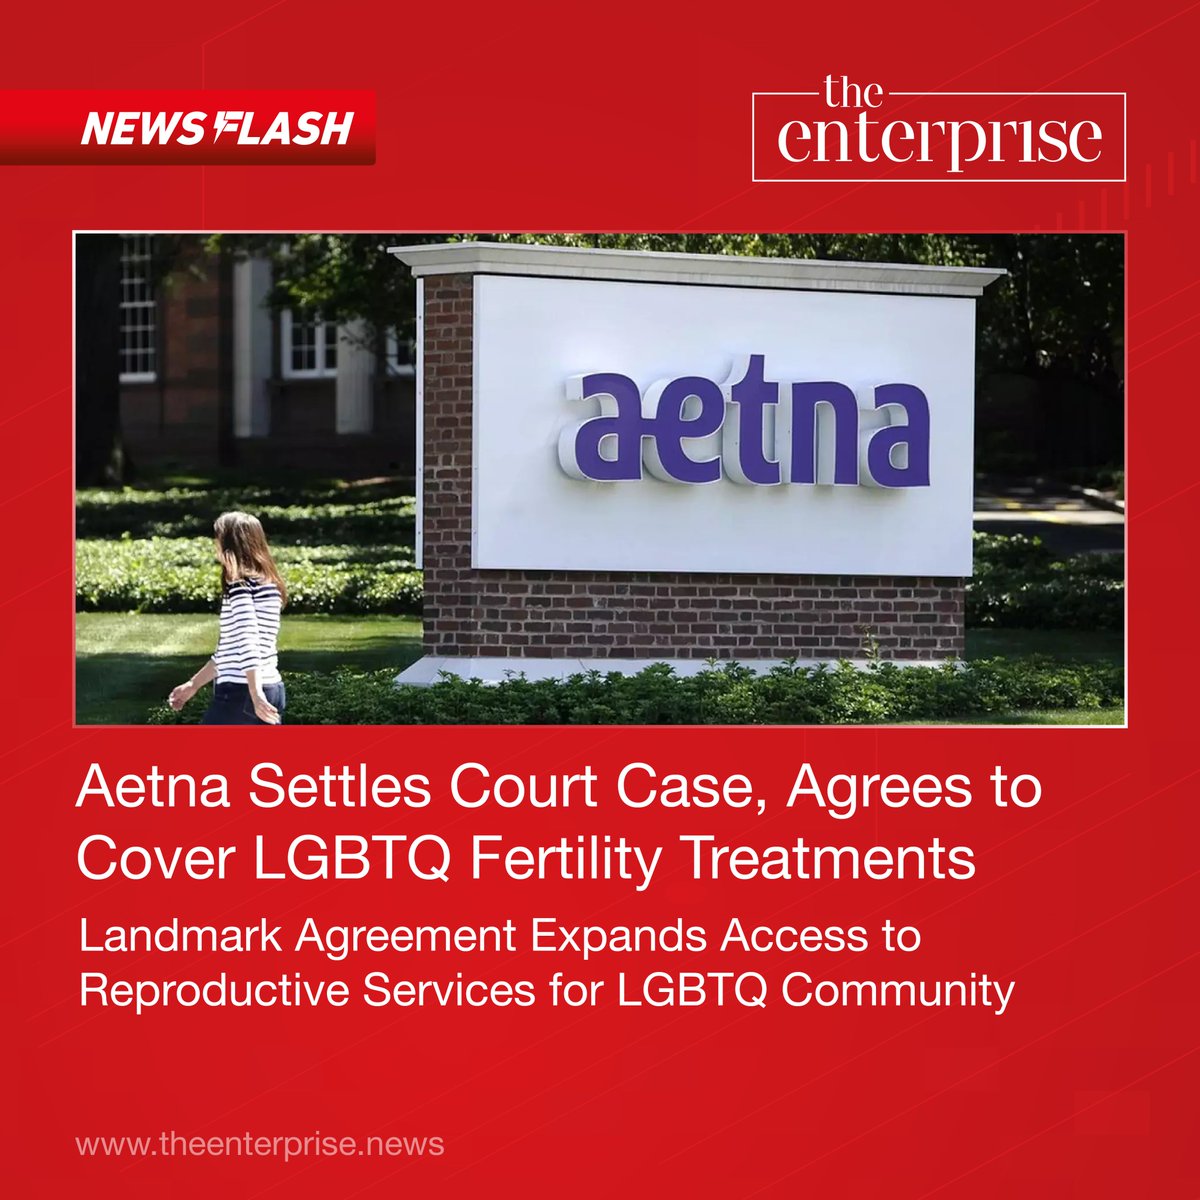 To know more, read the full article on #theenterprise
theenterprise.news/business/aetna…

#globalbusiness #theenterprisenews #followformore #global #finance